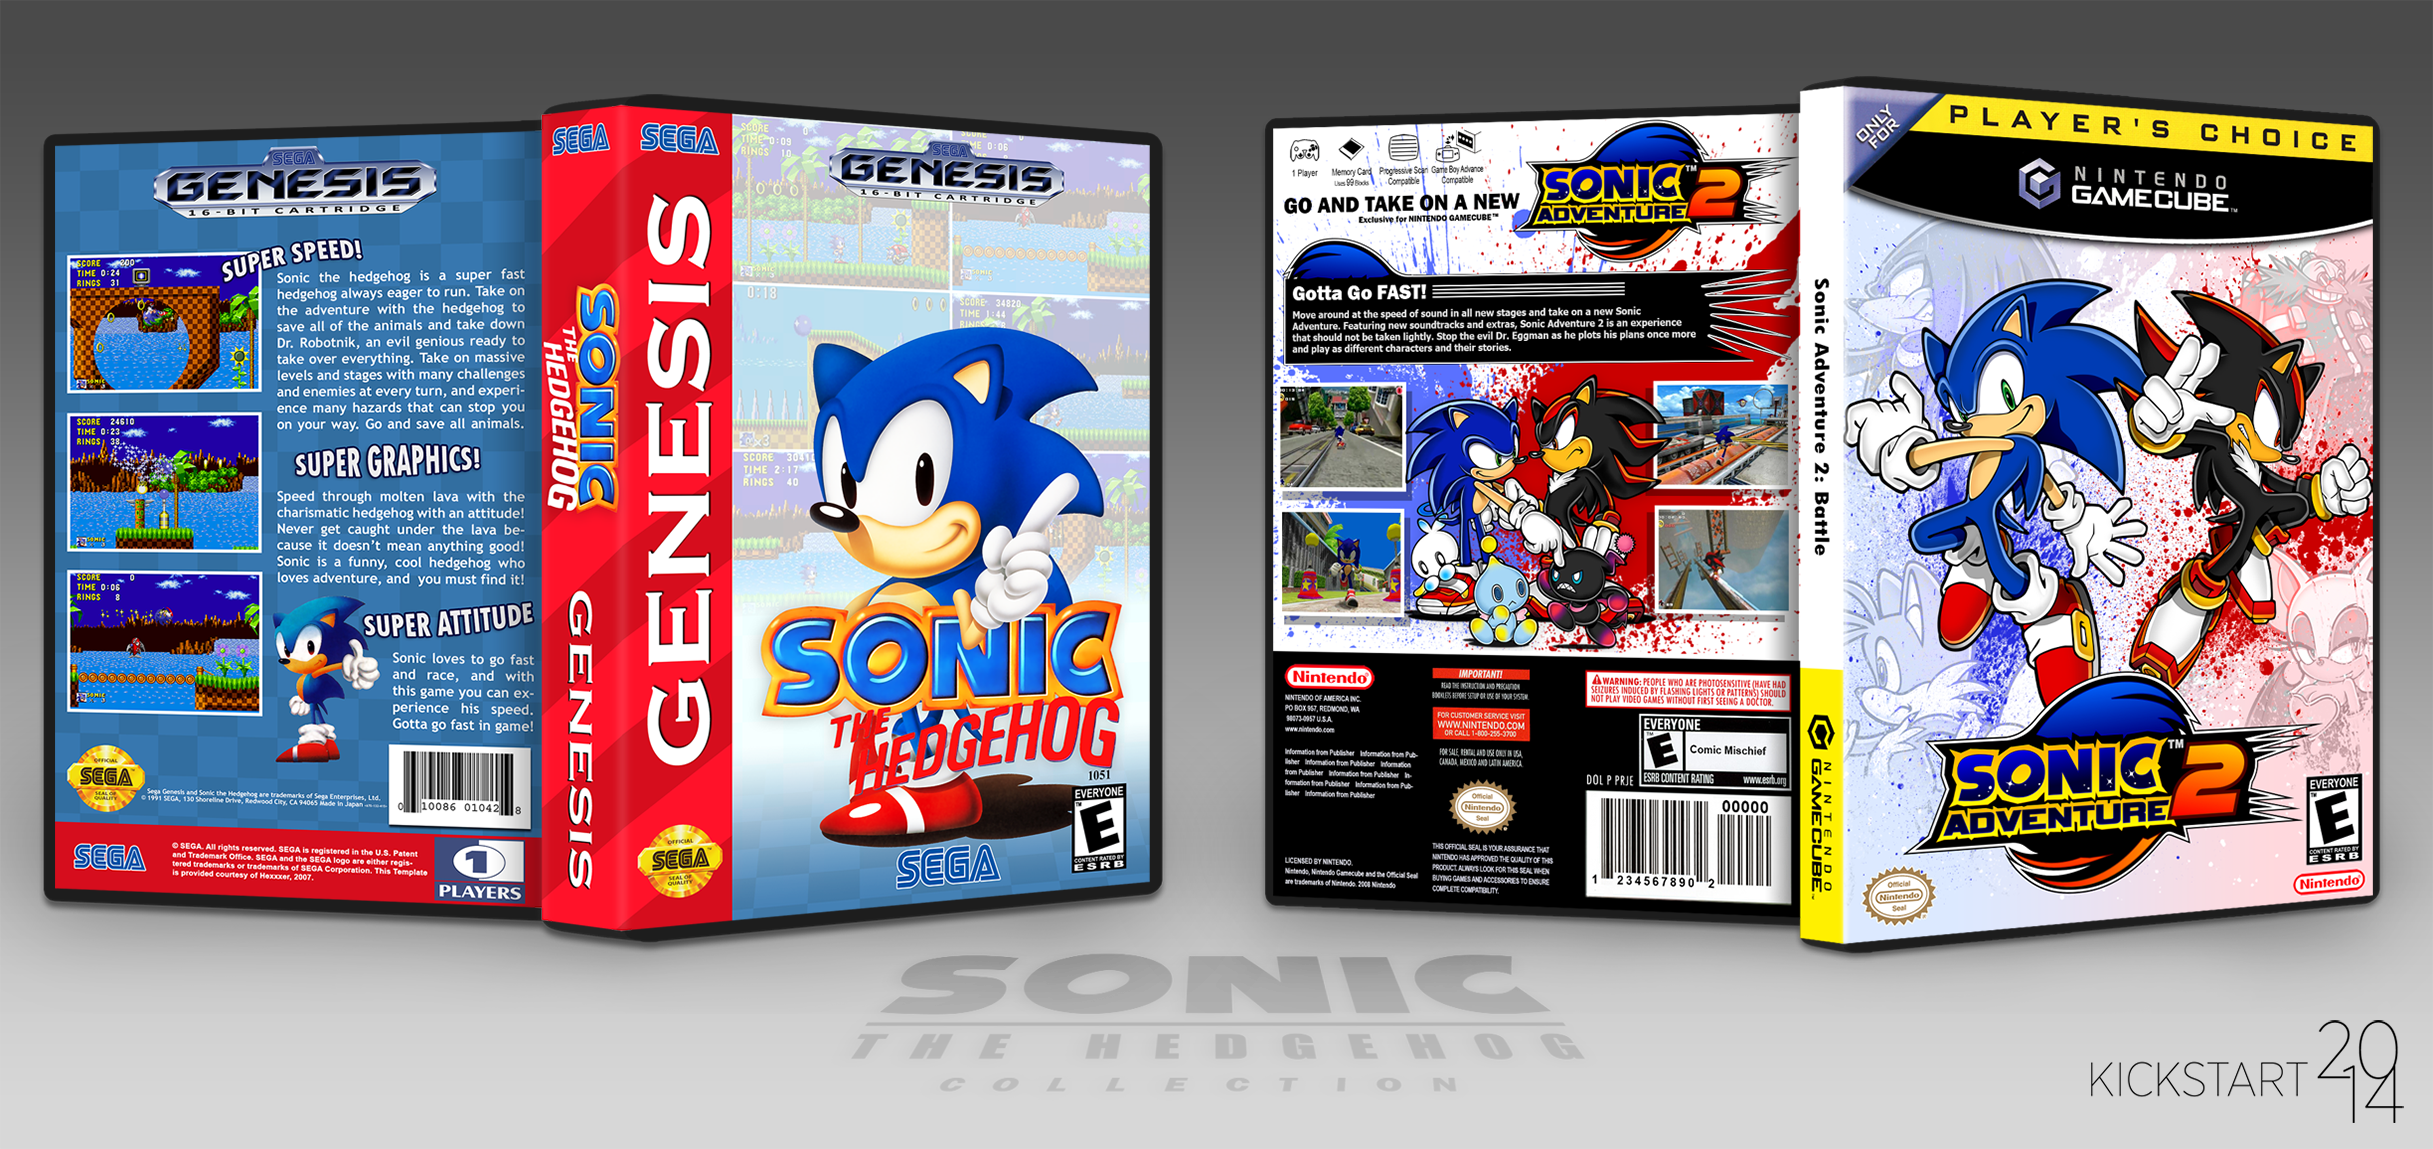 Sonic The Hedgehog Collection box cover